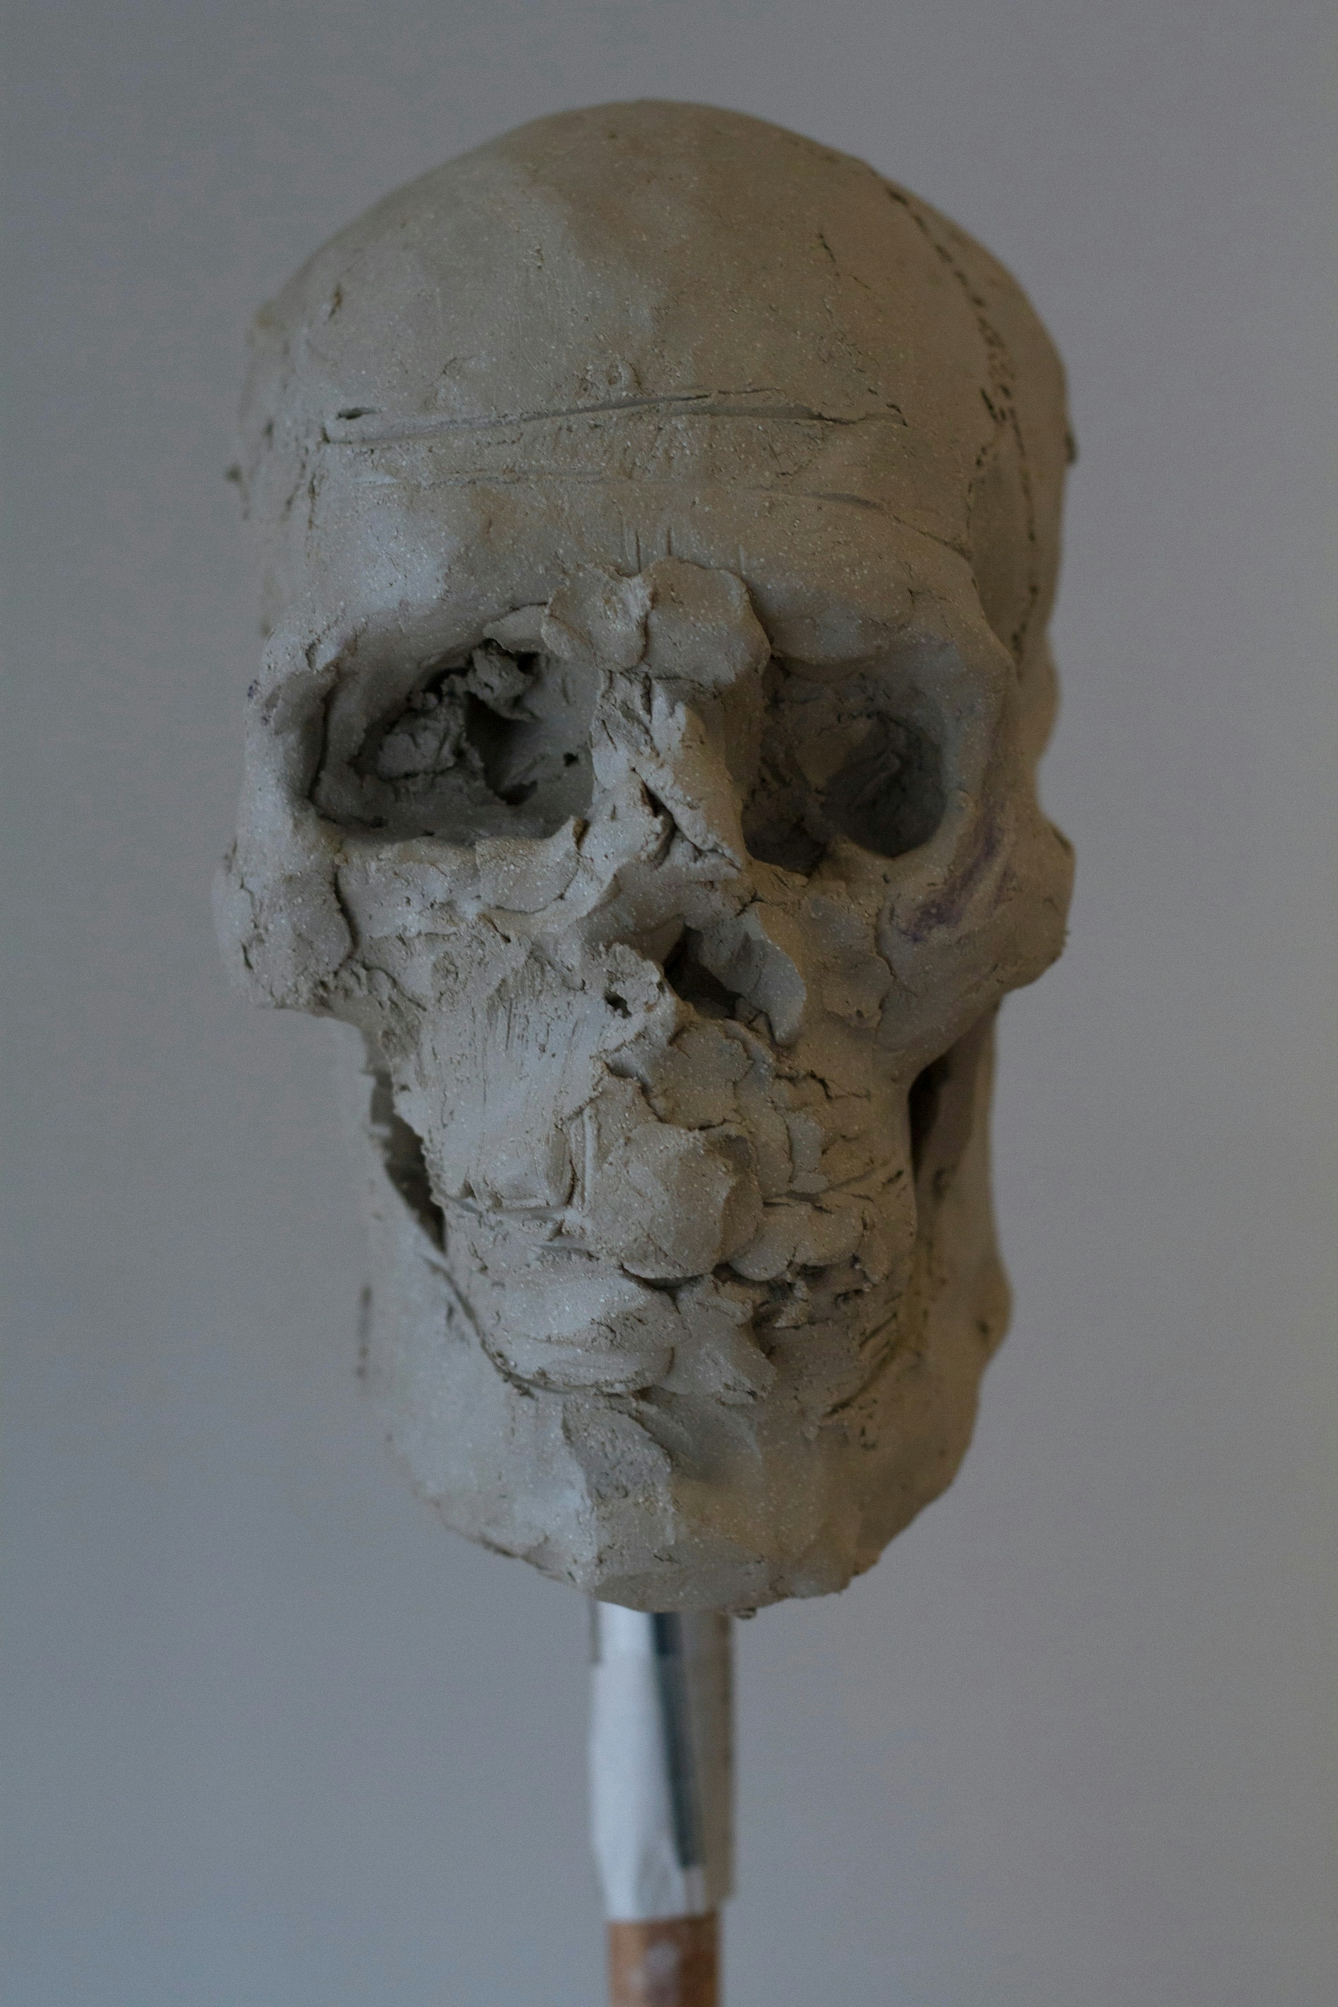 This image forms part of a series of work titled "Stranger than a Wolf" showing the gradual anatomical creation of a human head in clay.